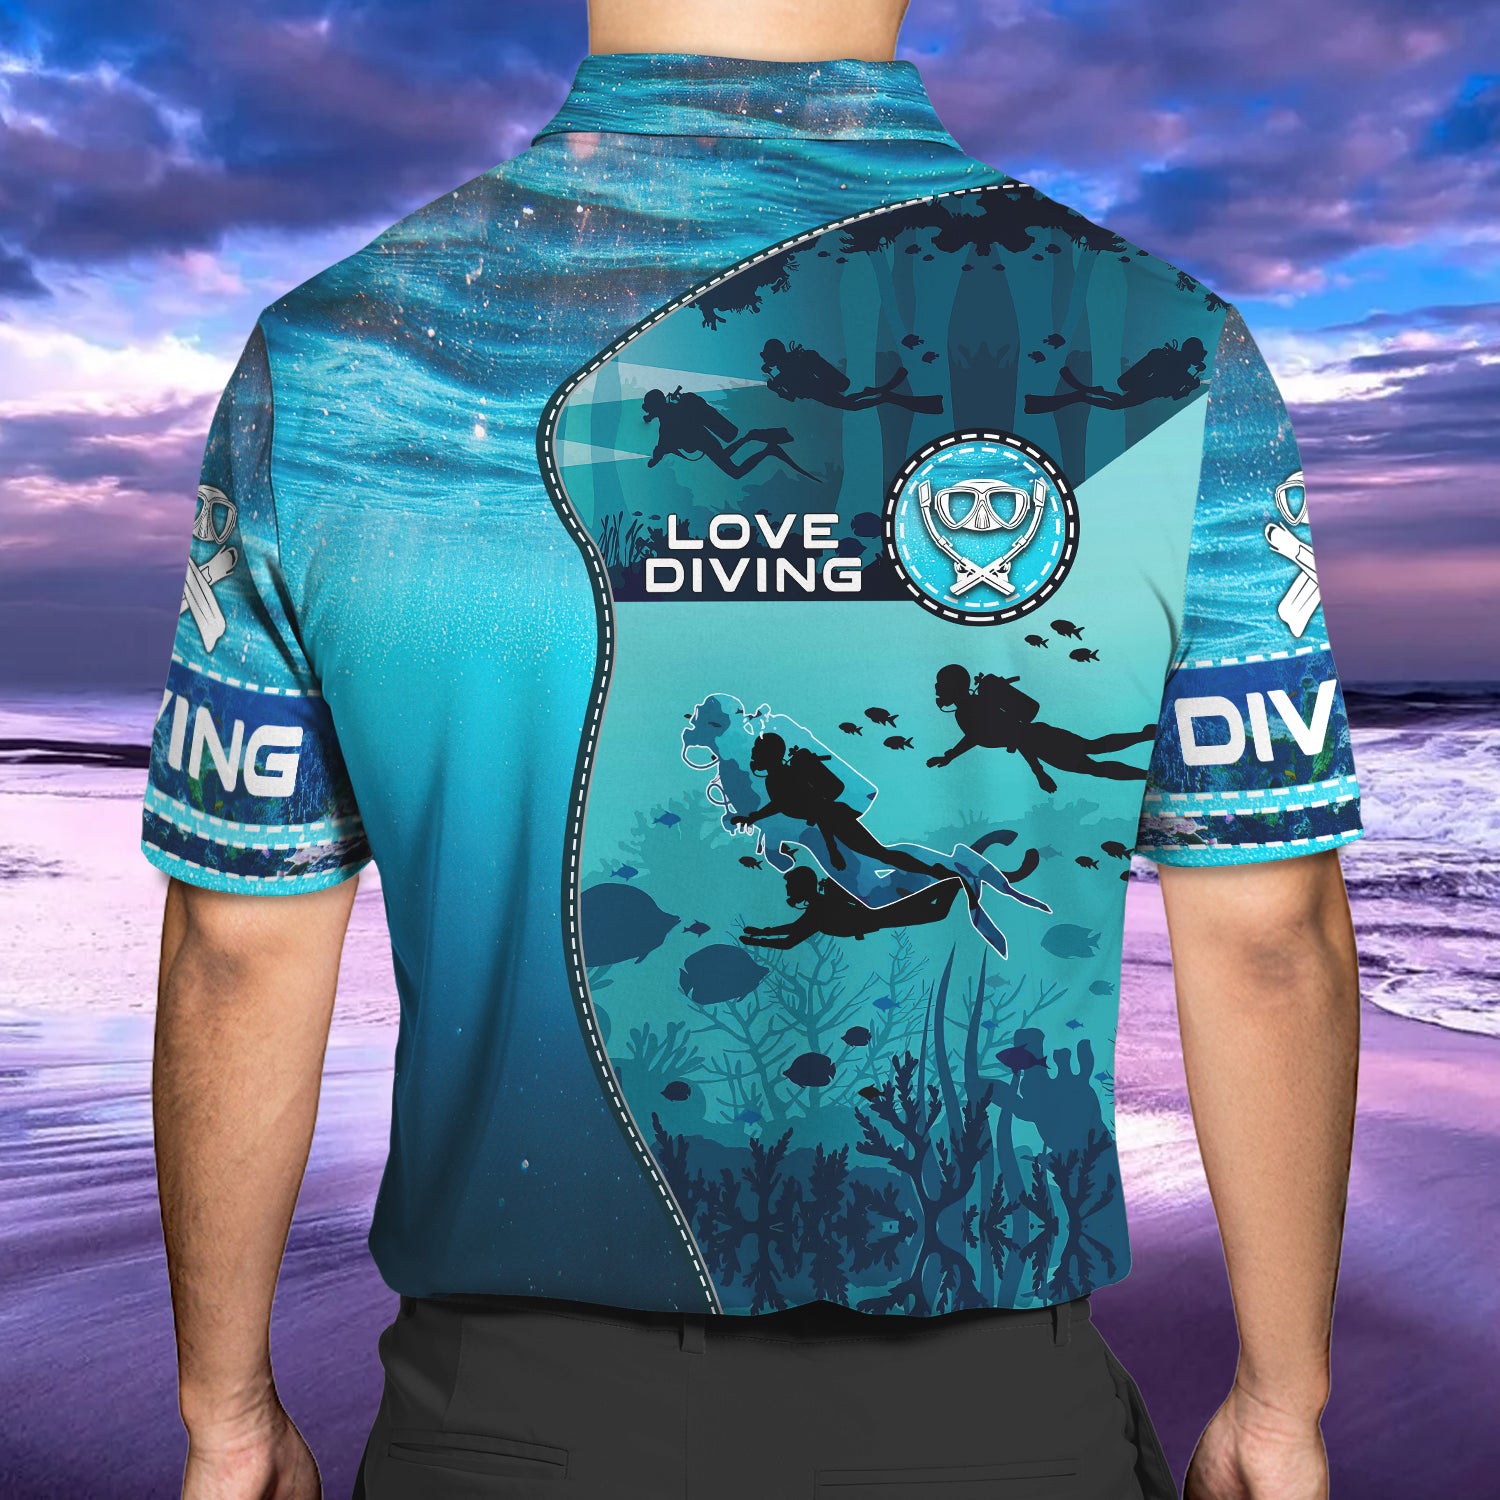 Love Diving - Lta98 - Personalized Name 3D Polo Shirt - 03